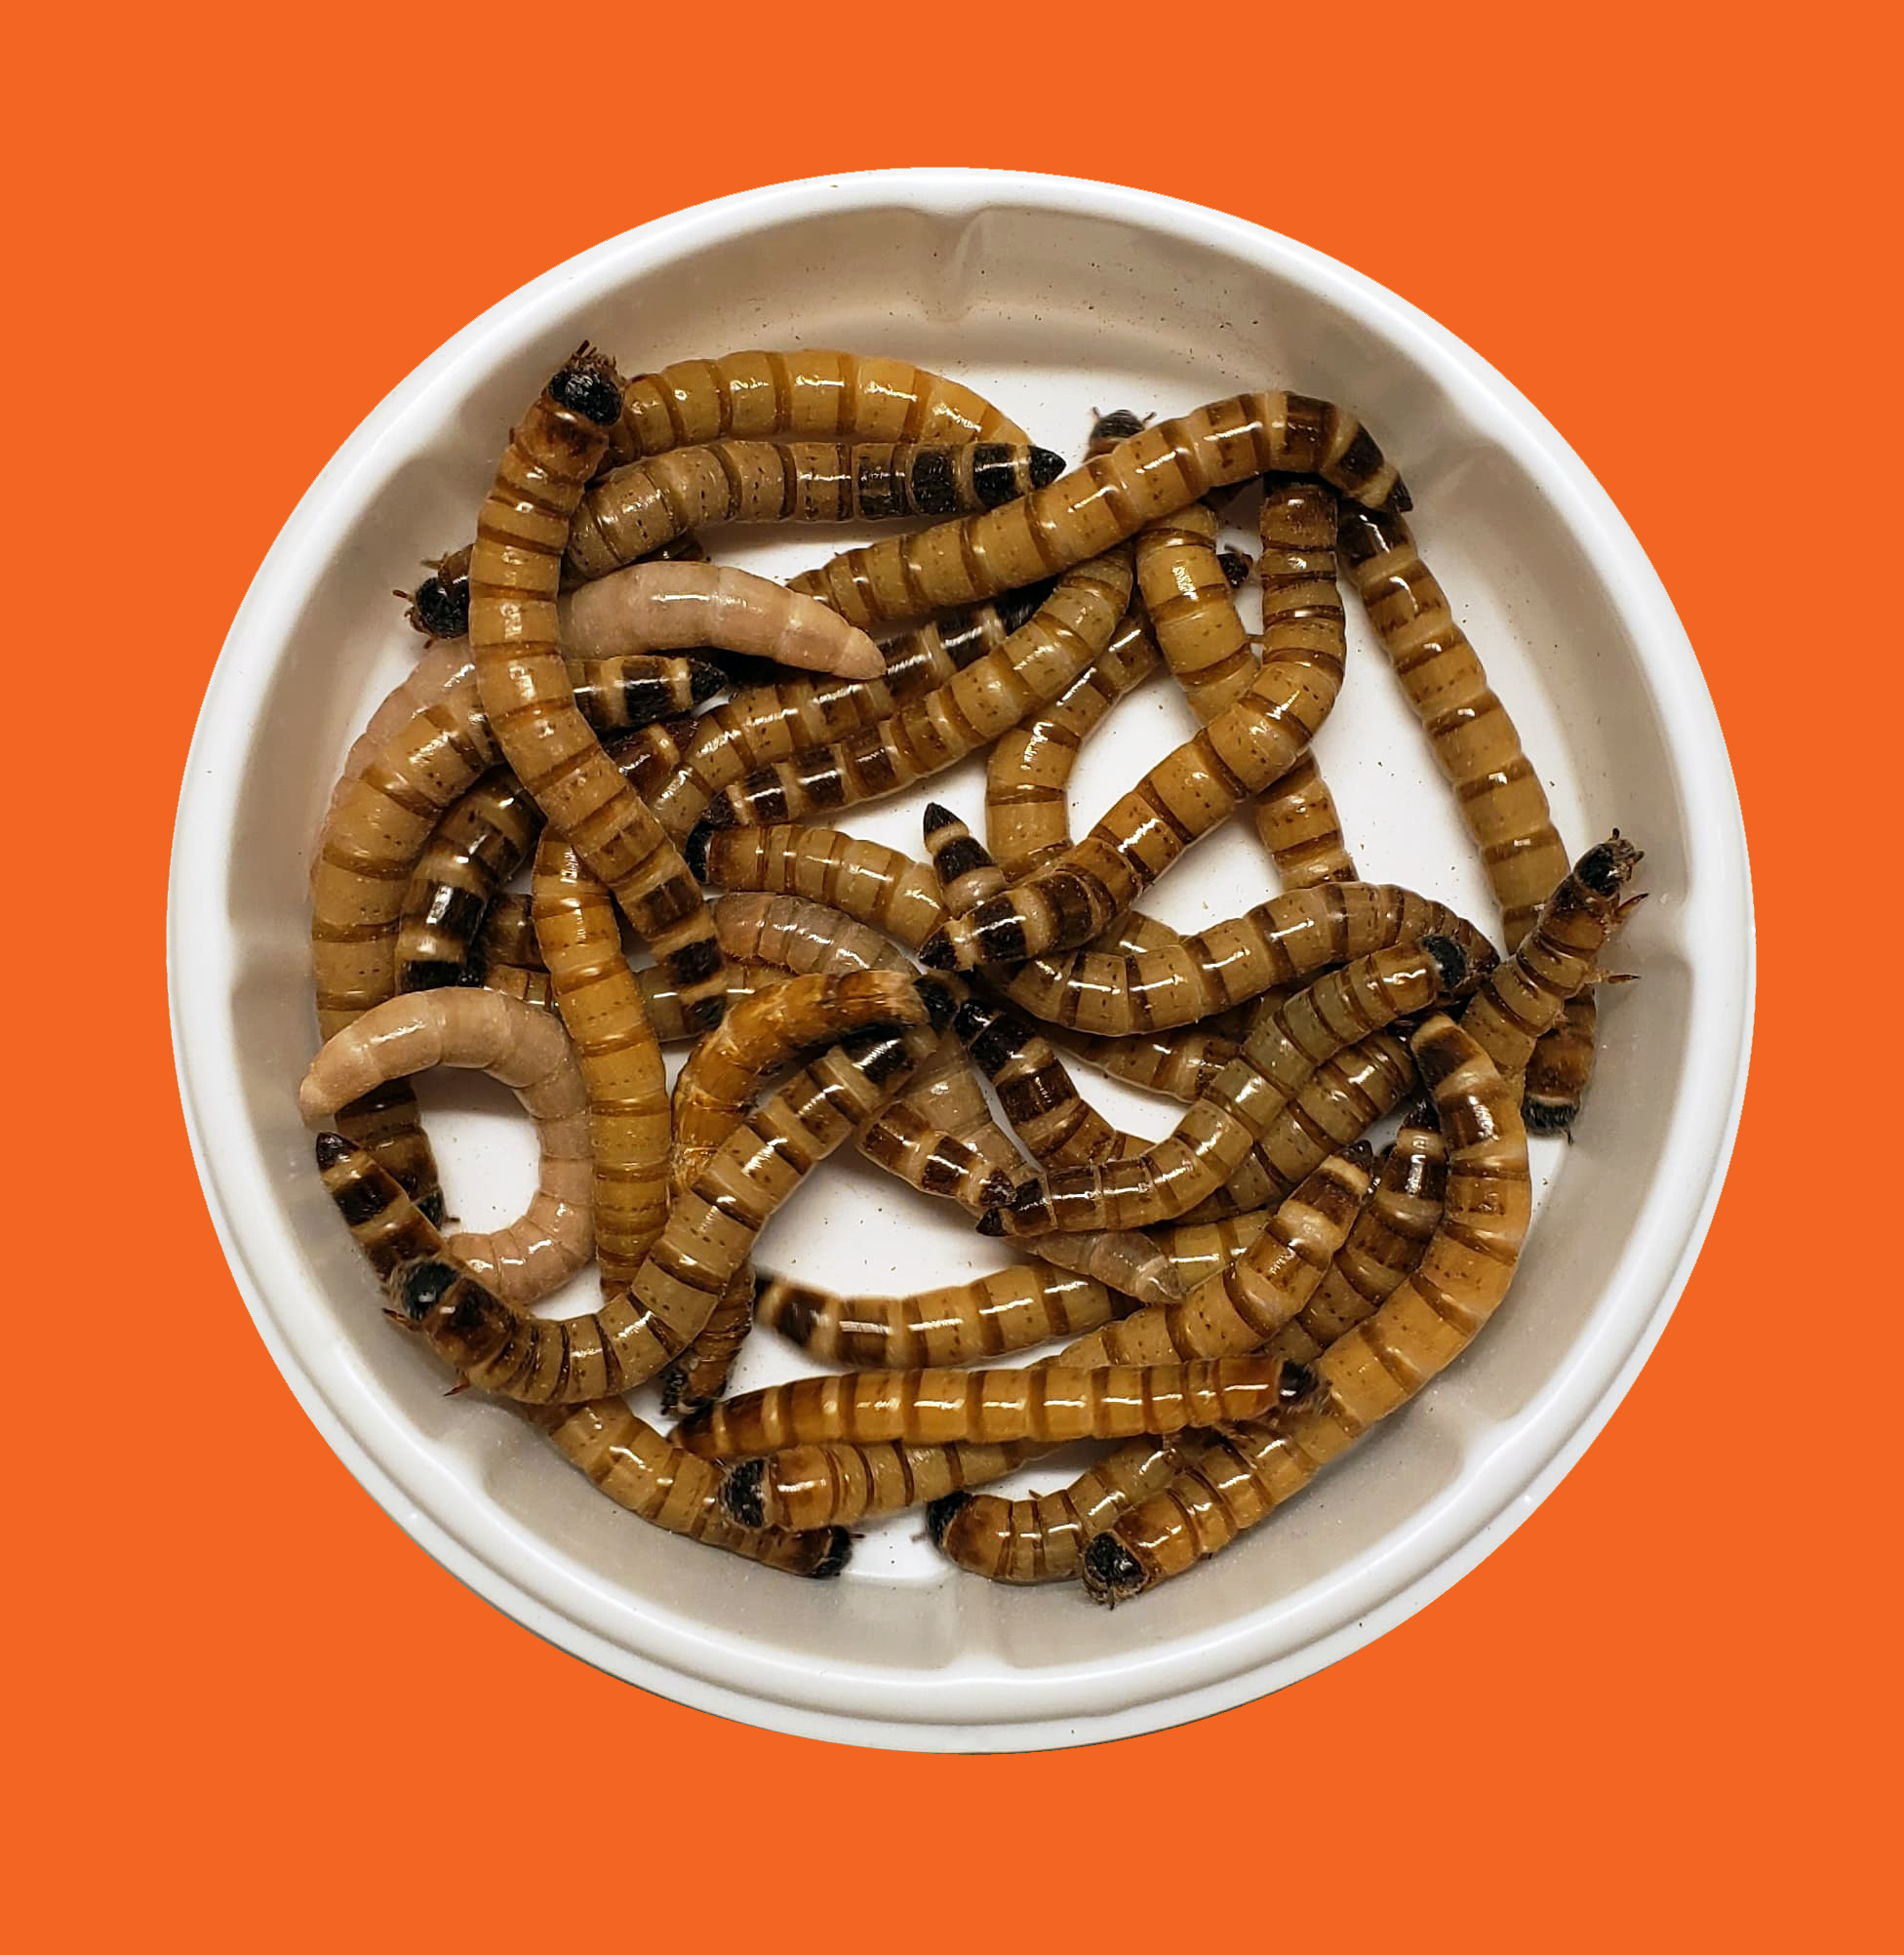 Superworms in a feeder cup